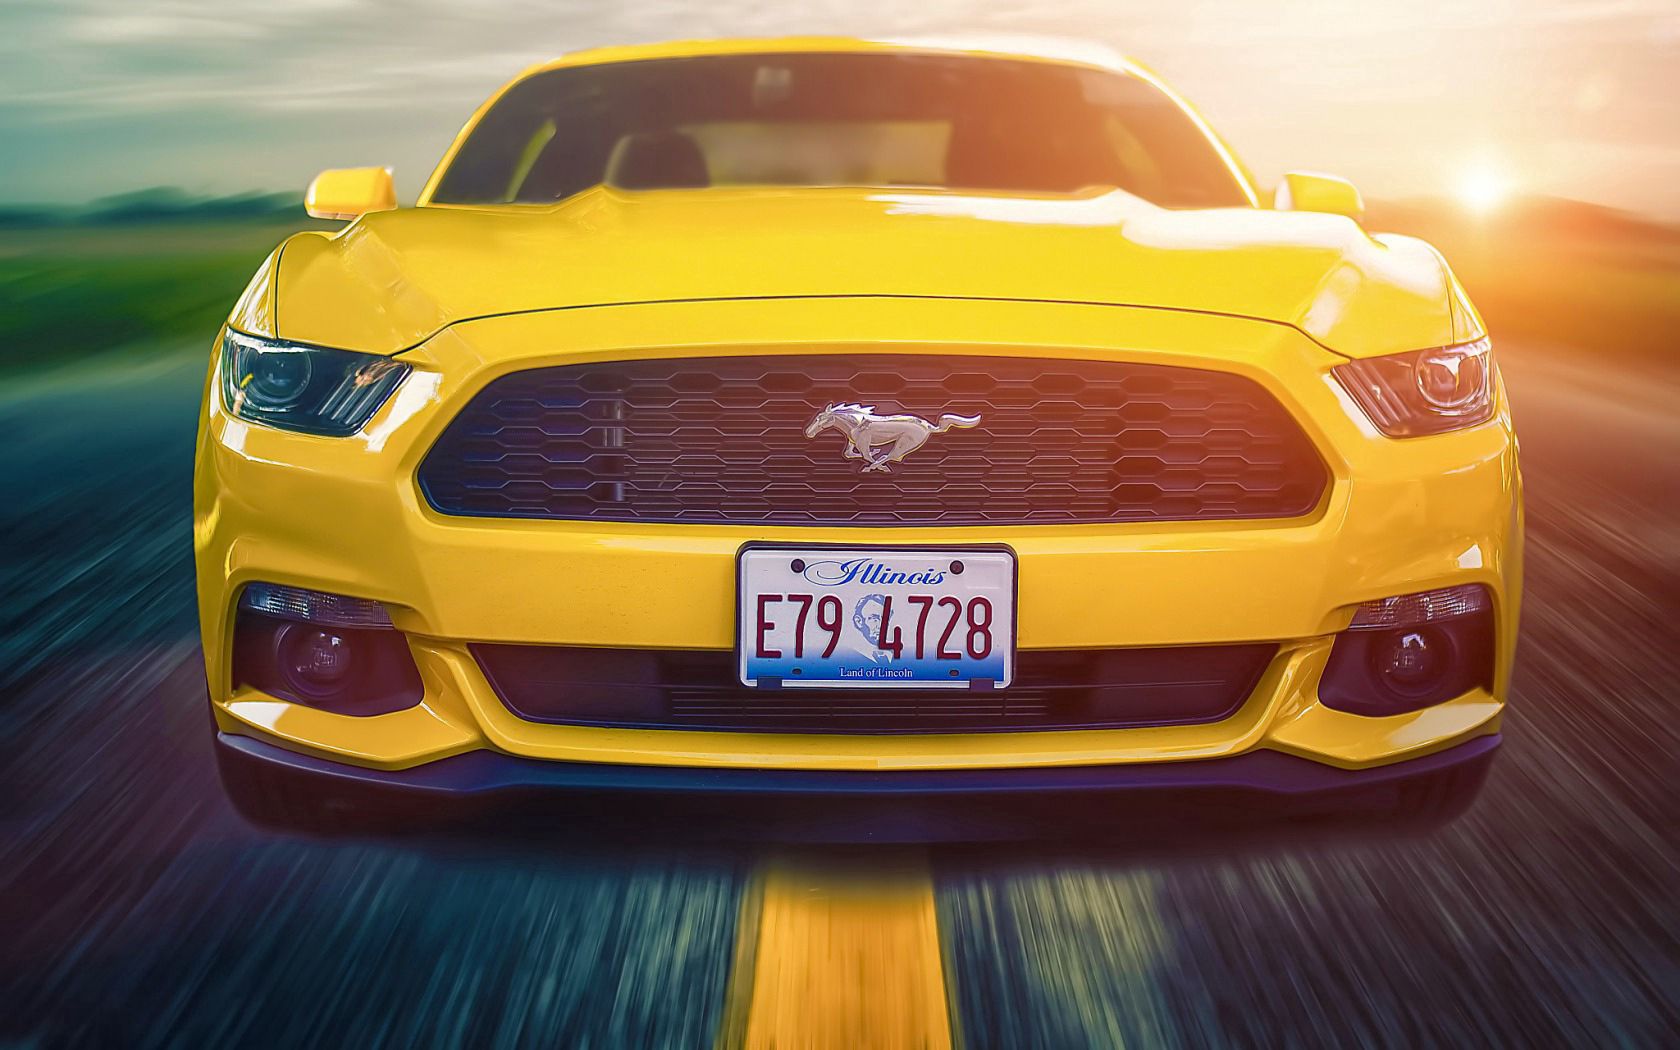 ford mustang, cars, yellow, front view, muscle car, 2015 Full HD